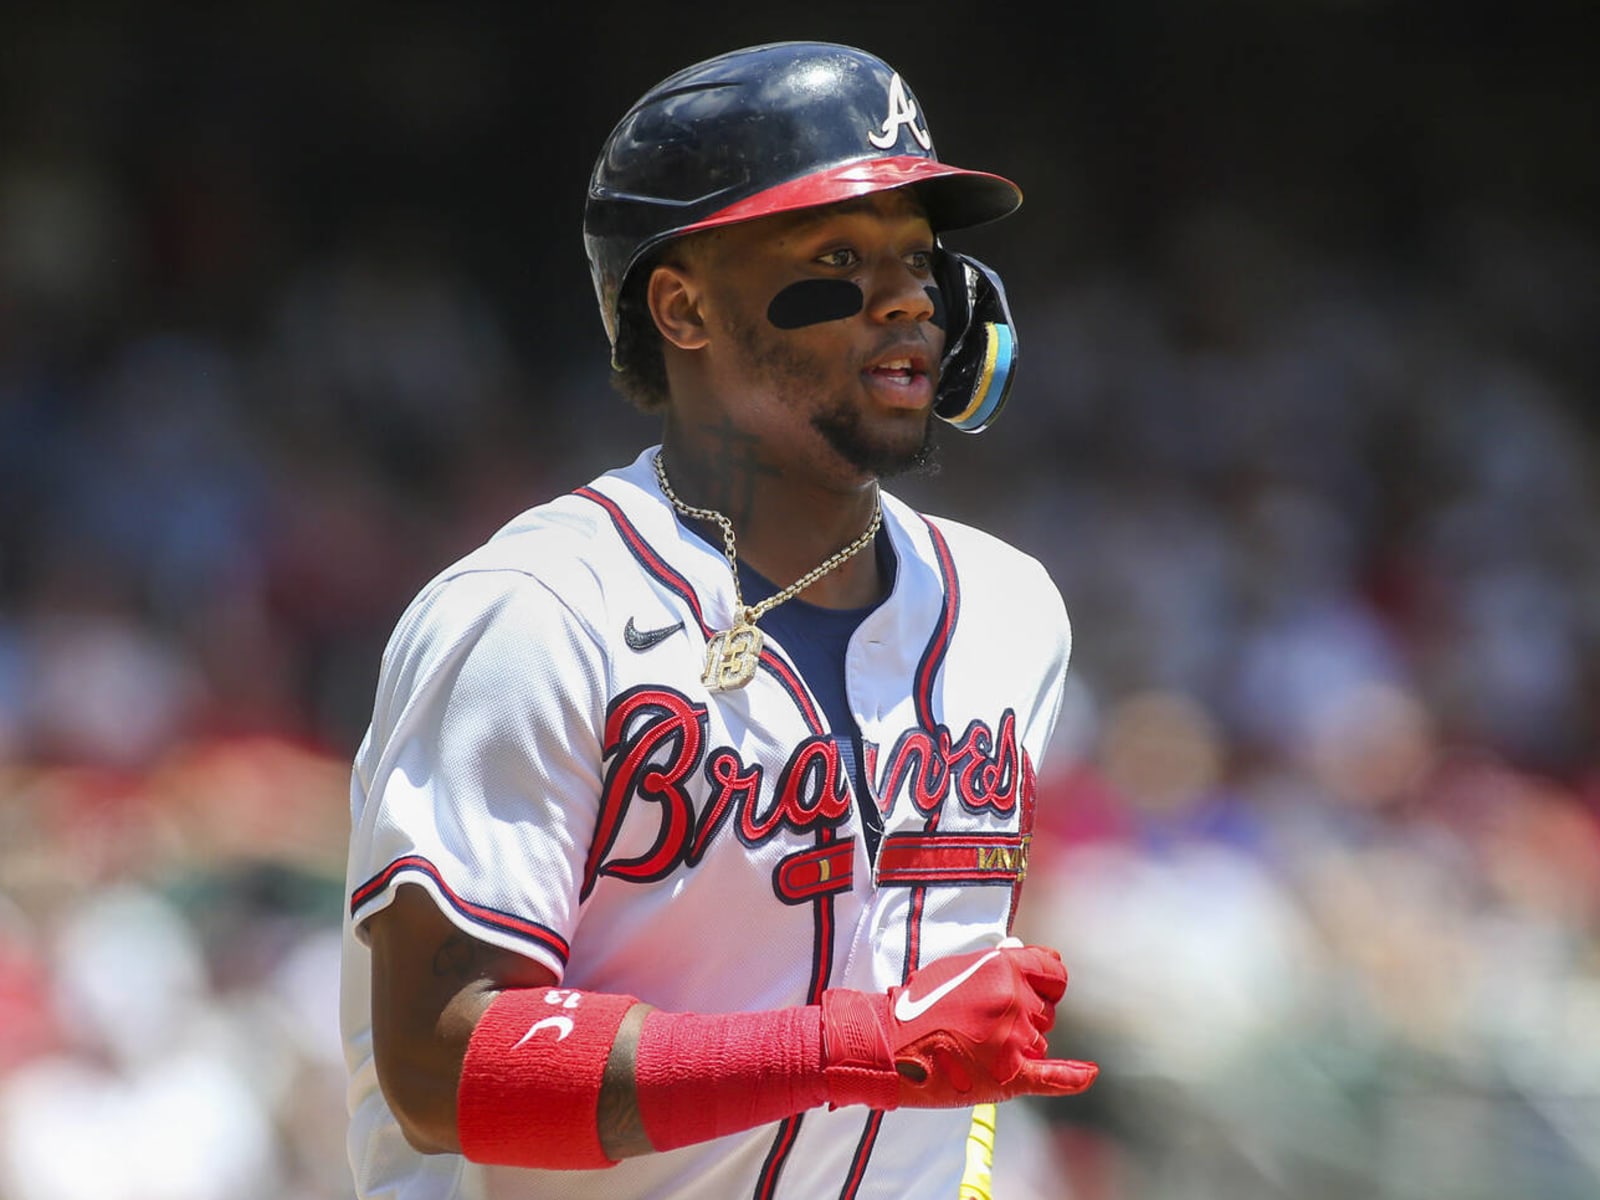 Ronald Acuña Jr. is the FIRST EVER player in history to hit 30